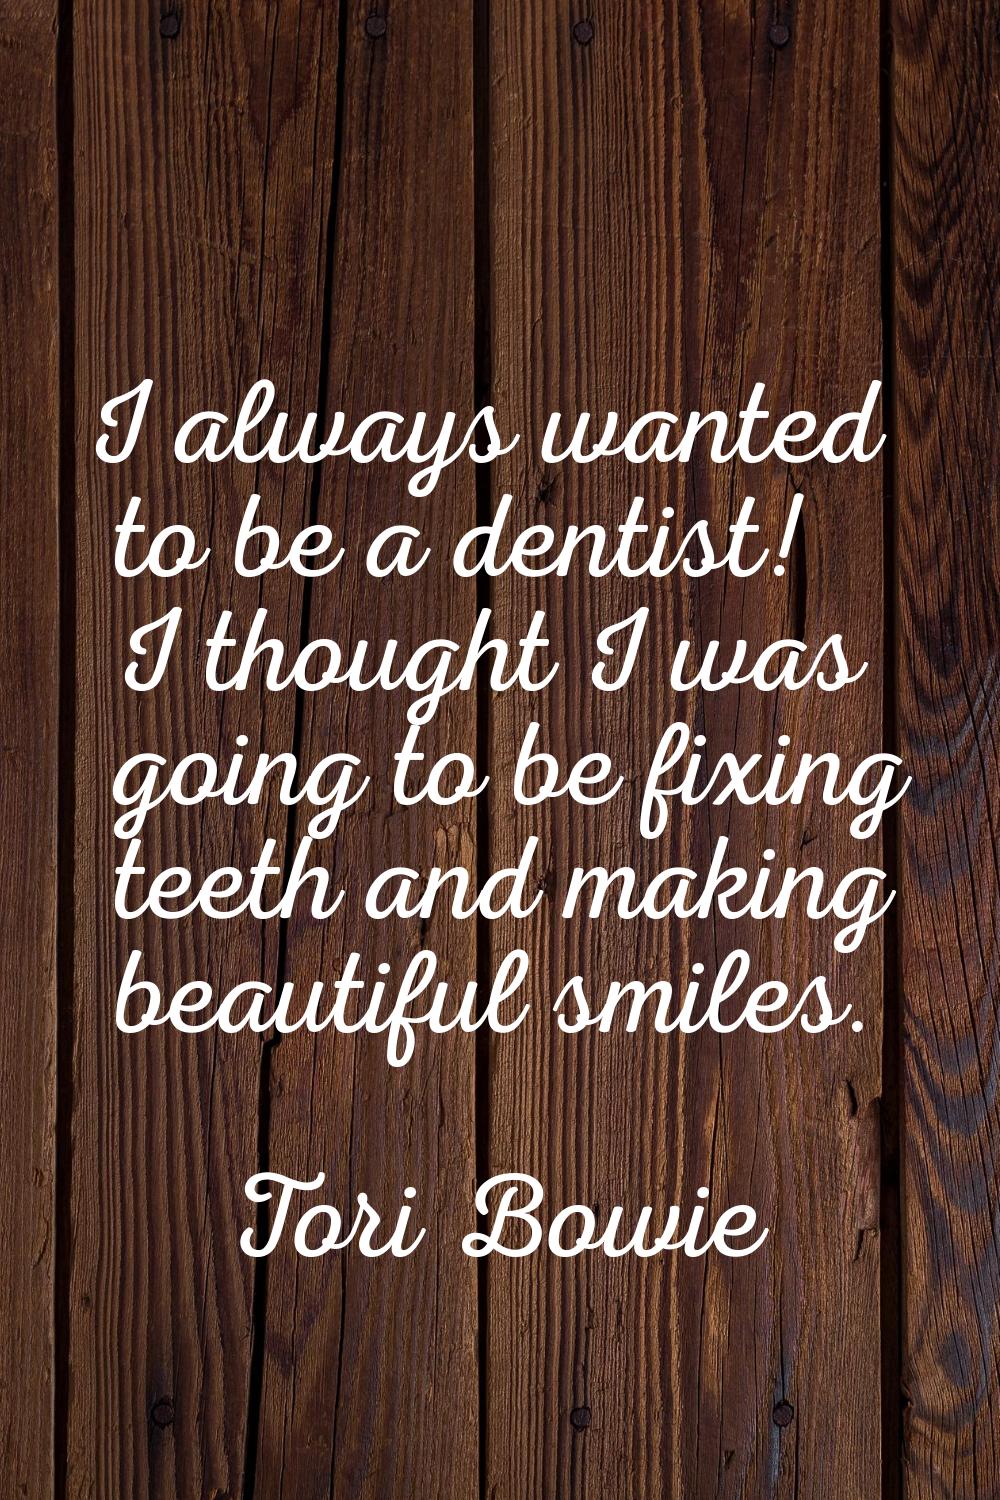 I always wanted to be a dentist! I thought I was going to be fixing teeth and making beautiful smil